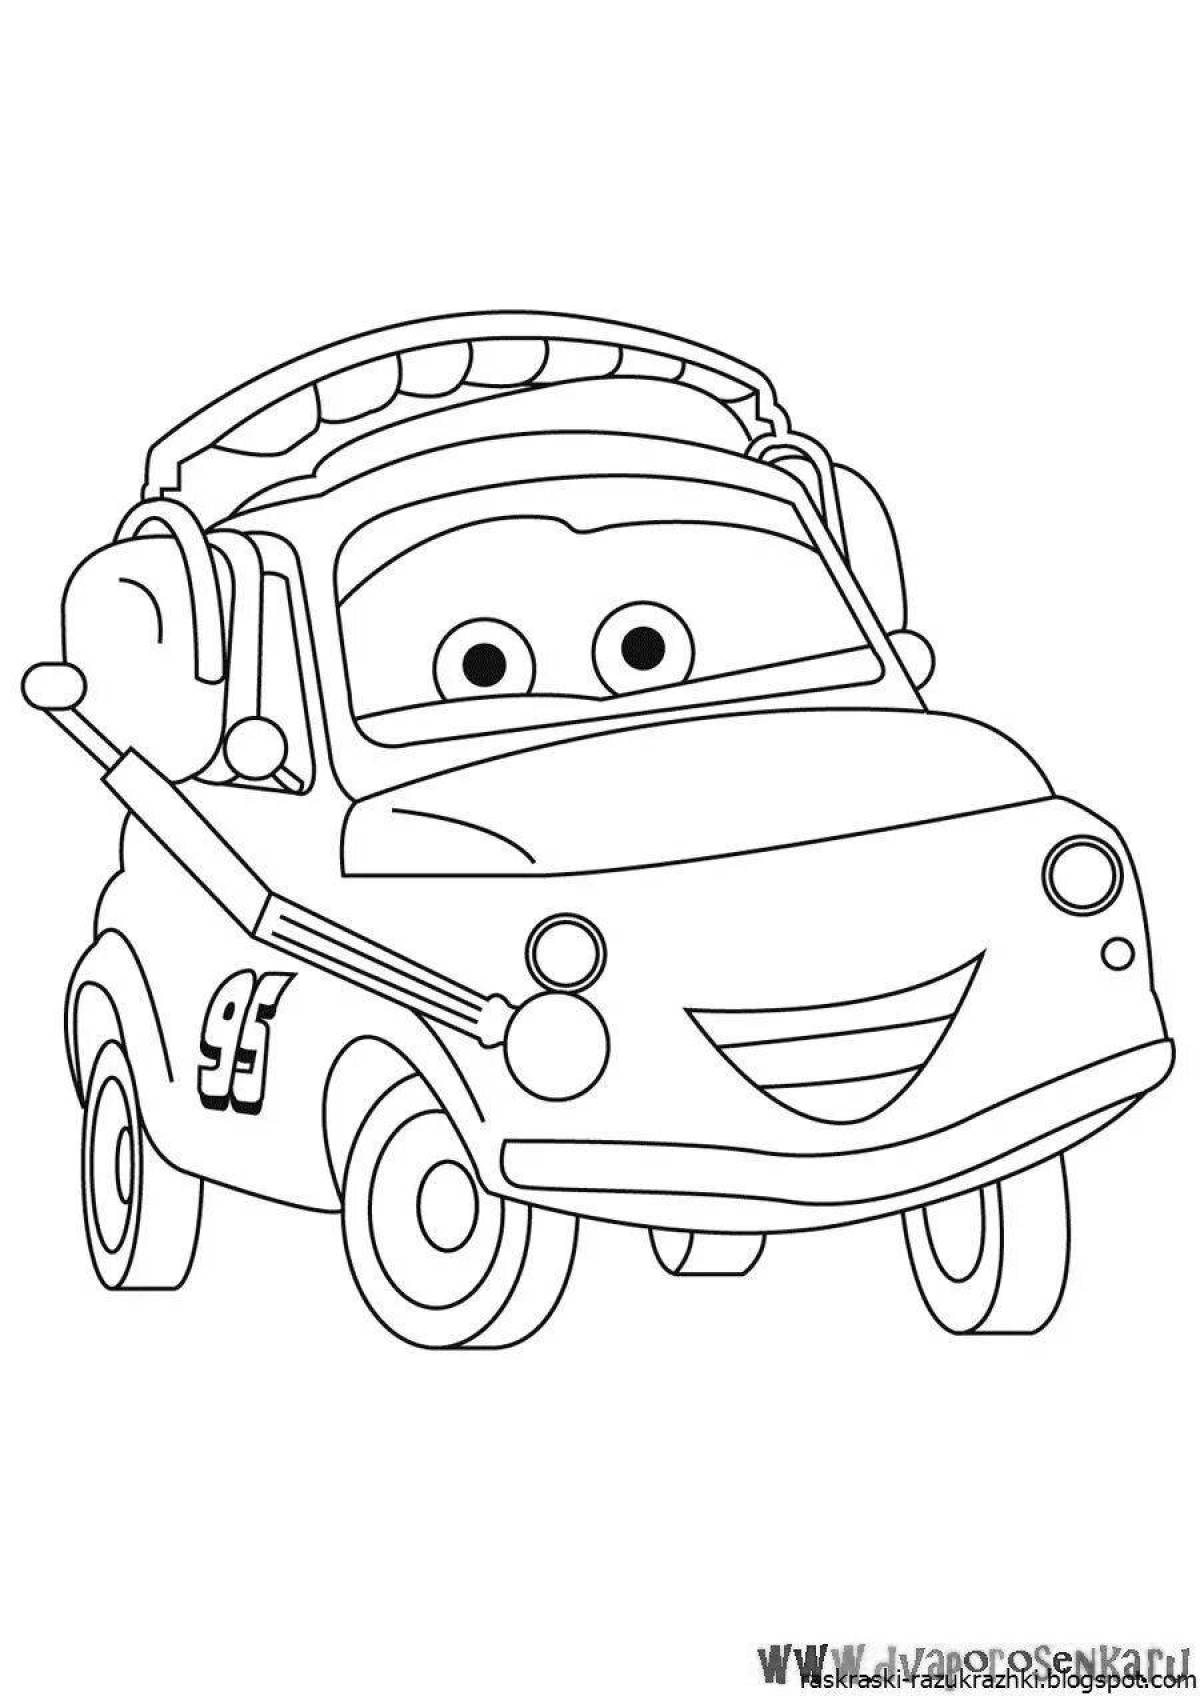 Exciting cartoon car coloring pages